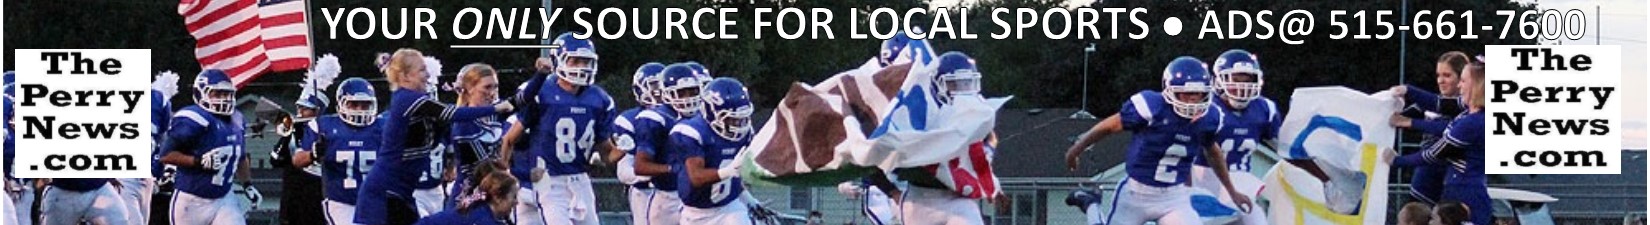 your-first-source-for-local-news-banner-sports-2